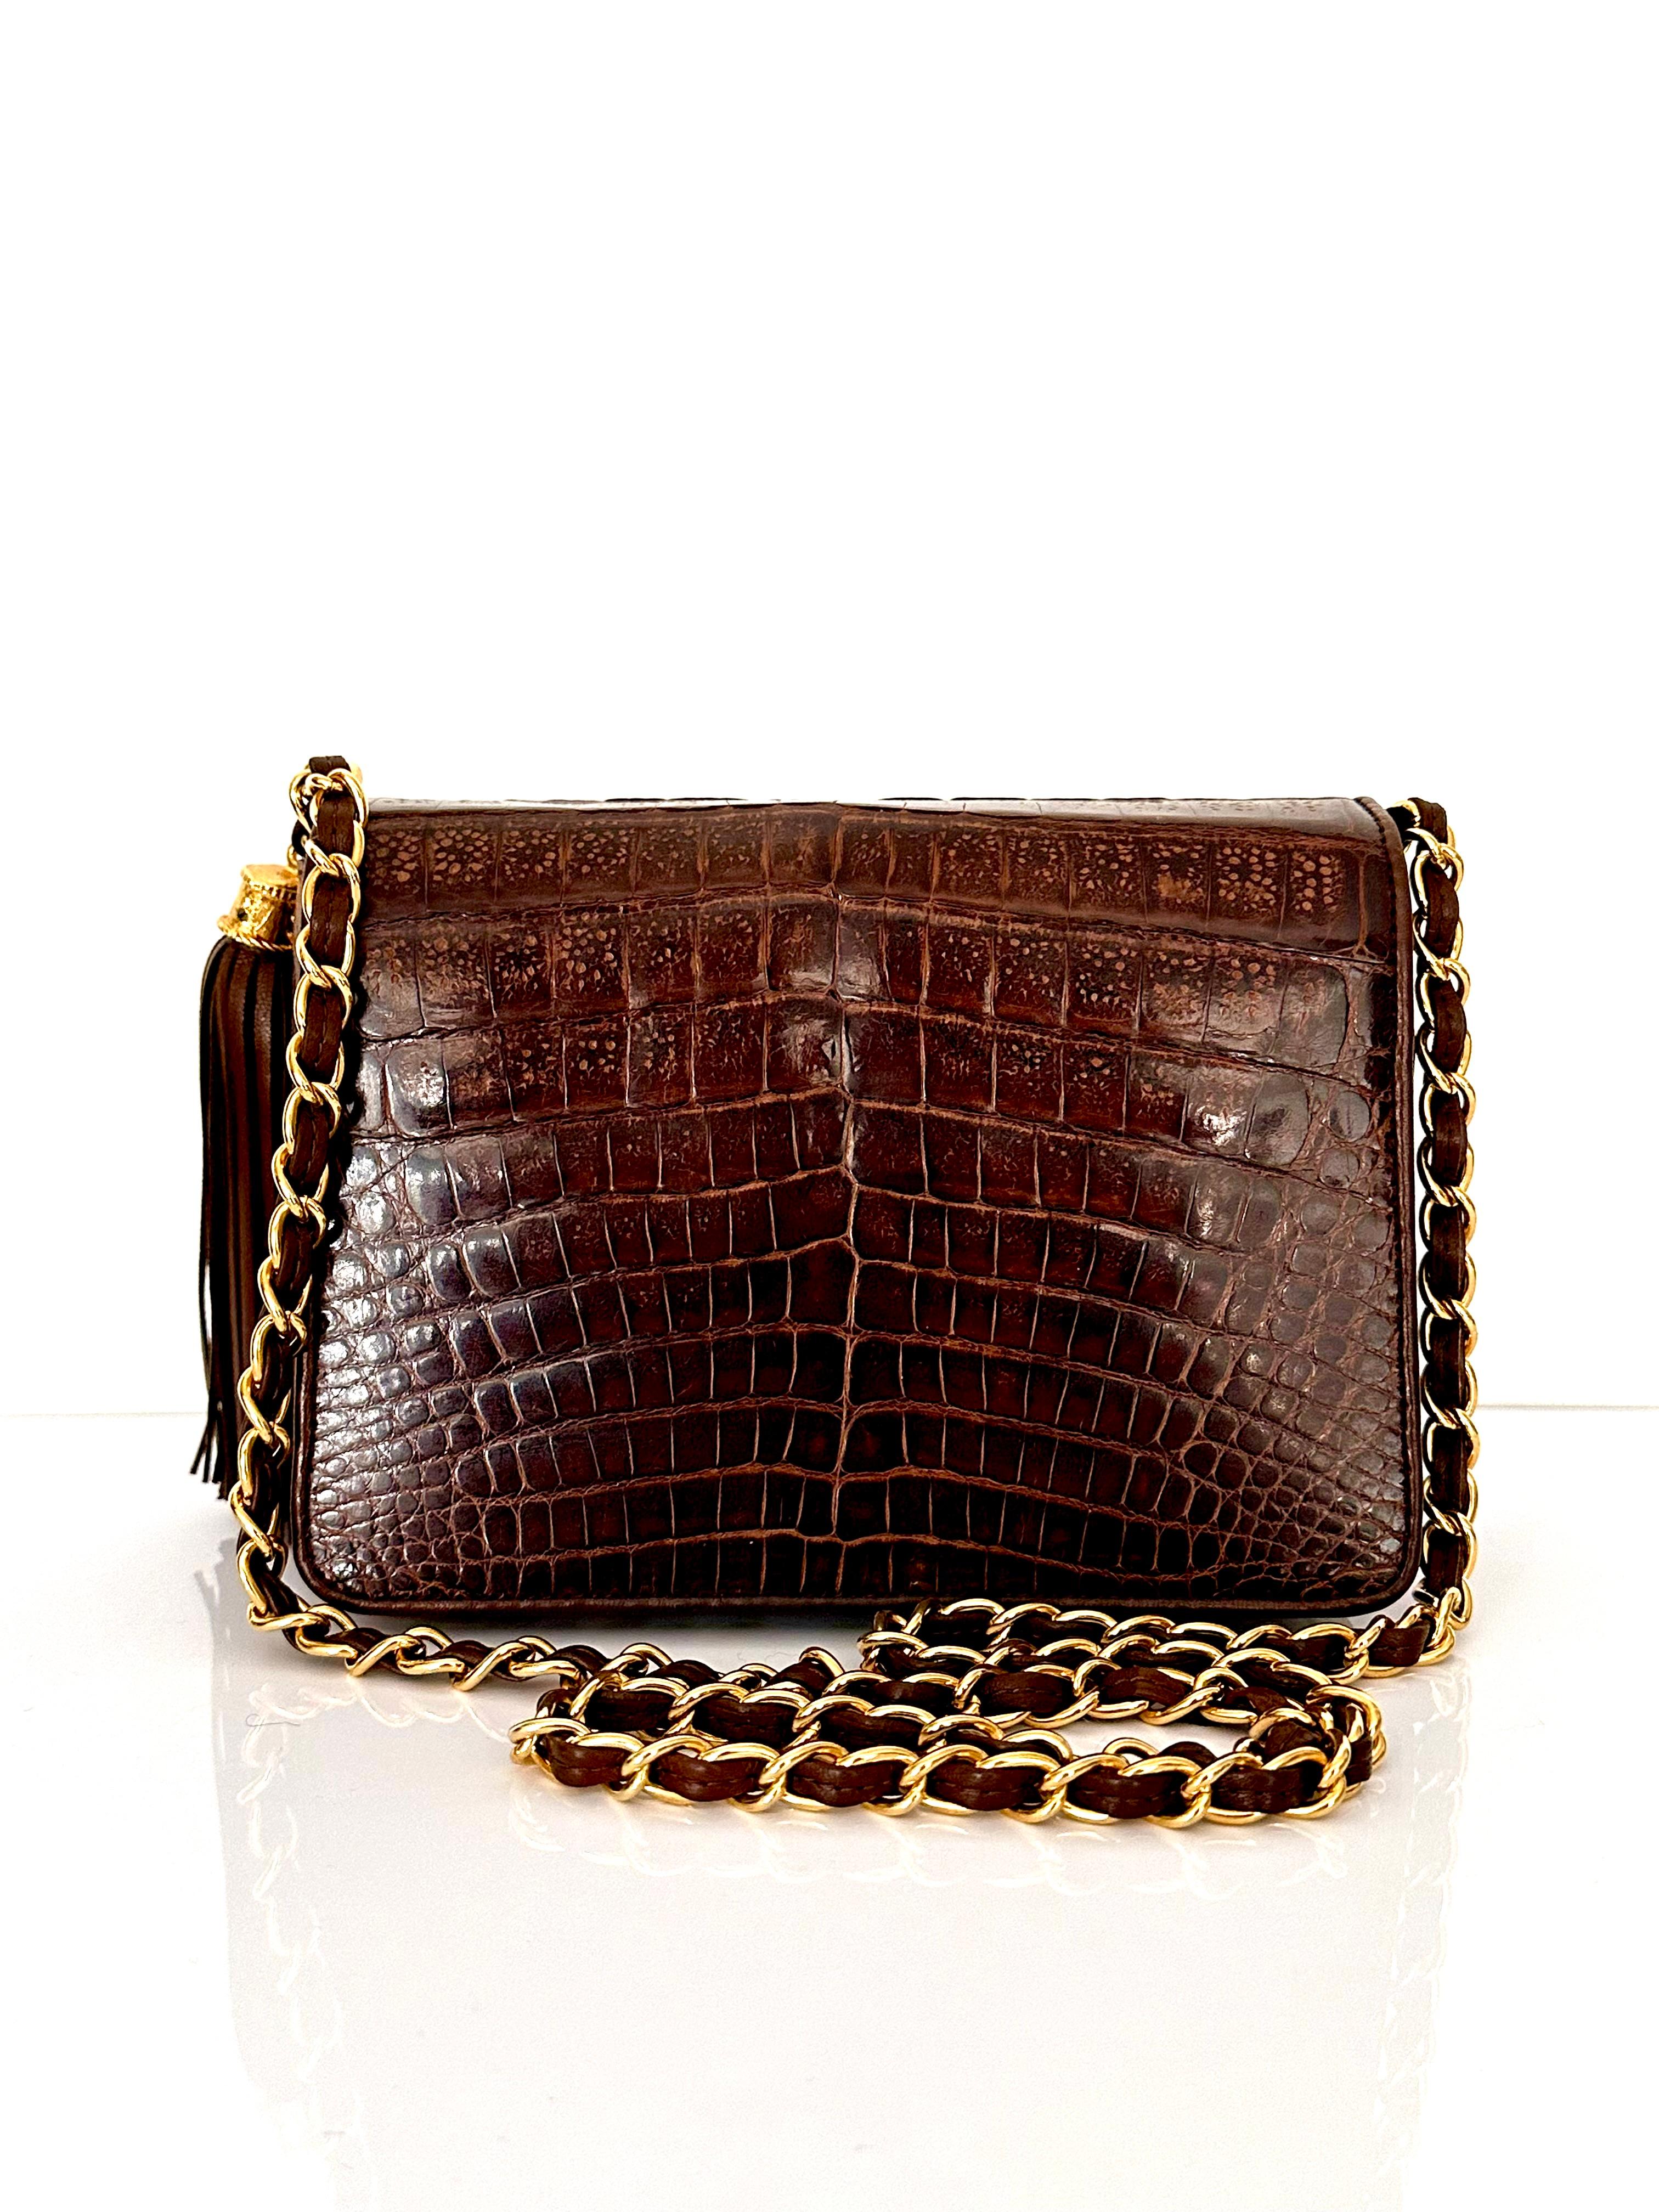 Available for purchase is this absolutely stunning and rare vintage Chanel bag! Crafted from genuine crocodile this gorgeous piece features 24kt gold plated hardware! You will notice in the photos not only is the crocodile in gorgeous condition but